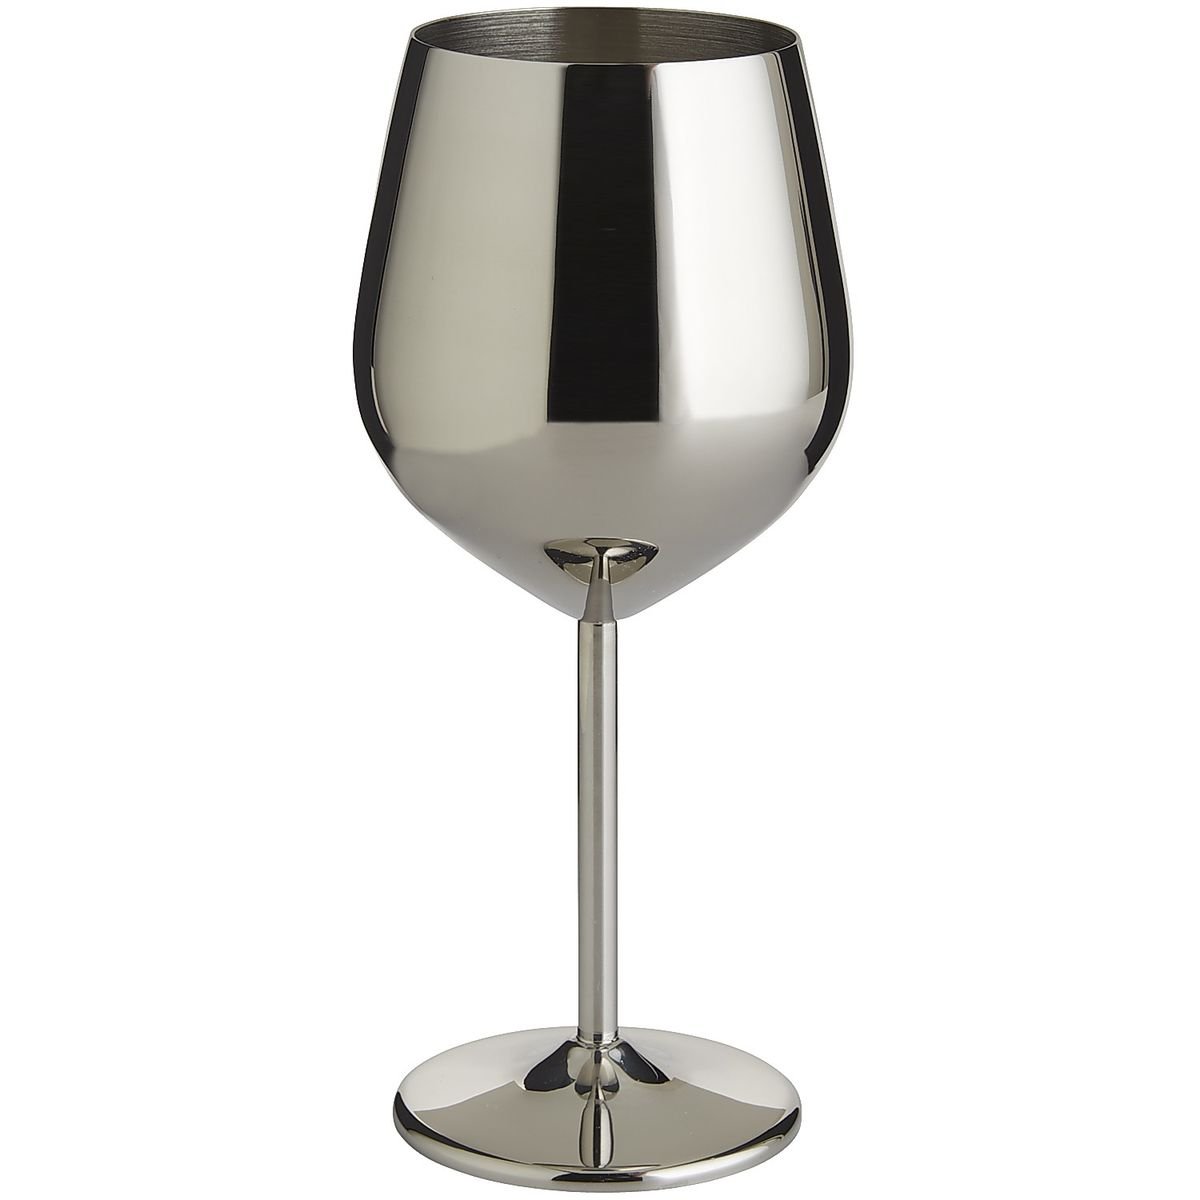 Copa para Vino Stainless Steel Pier 1 Imports